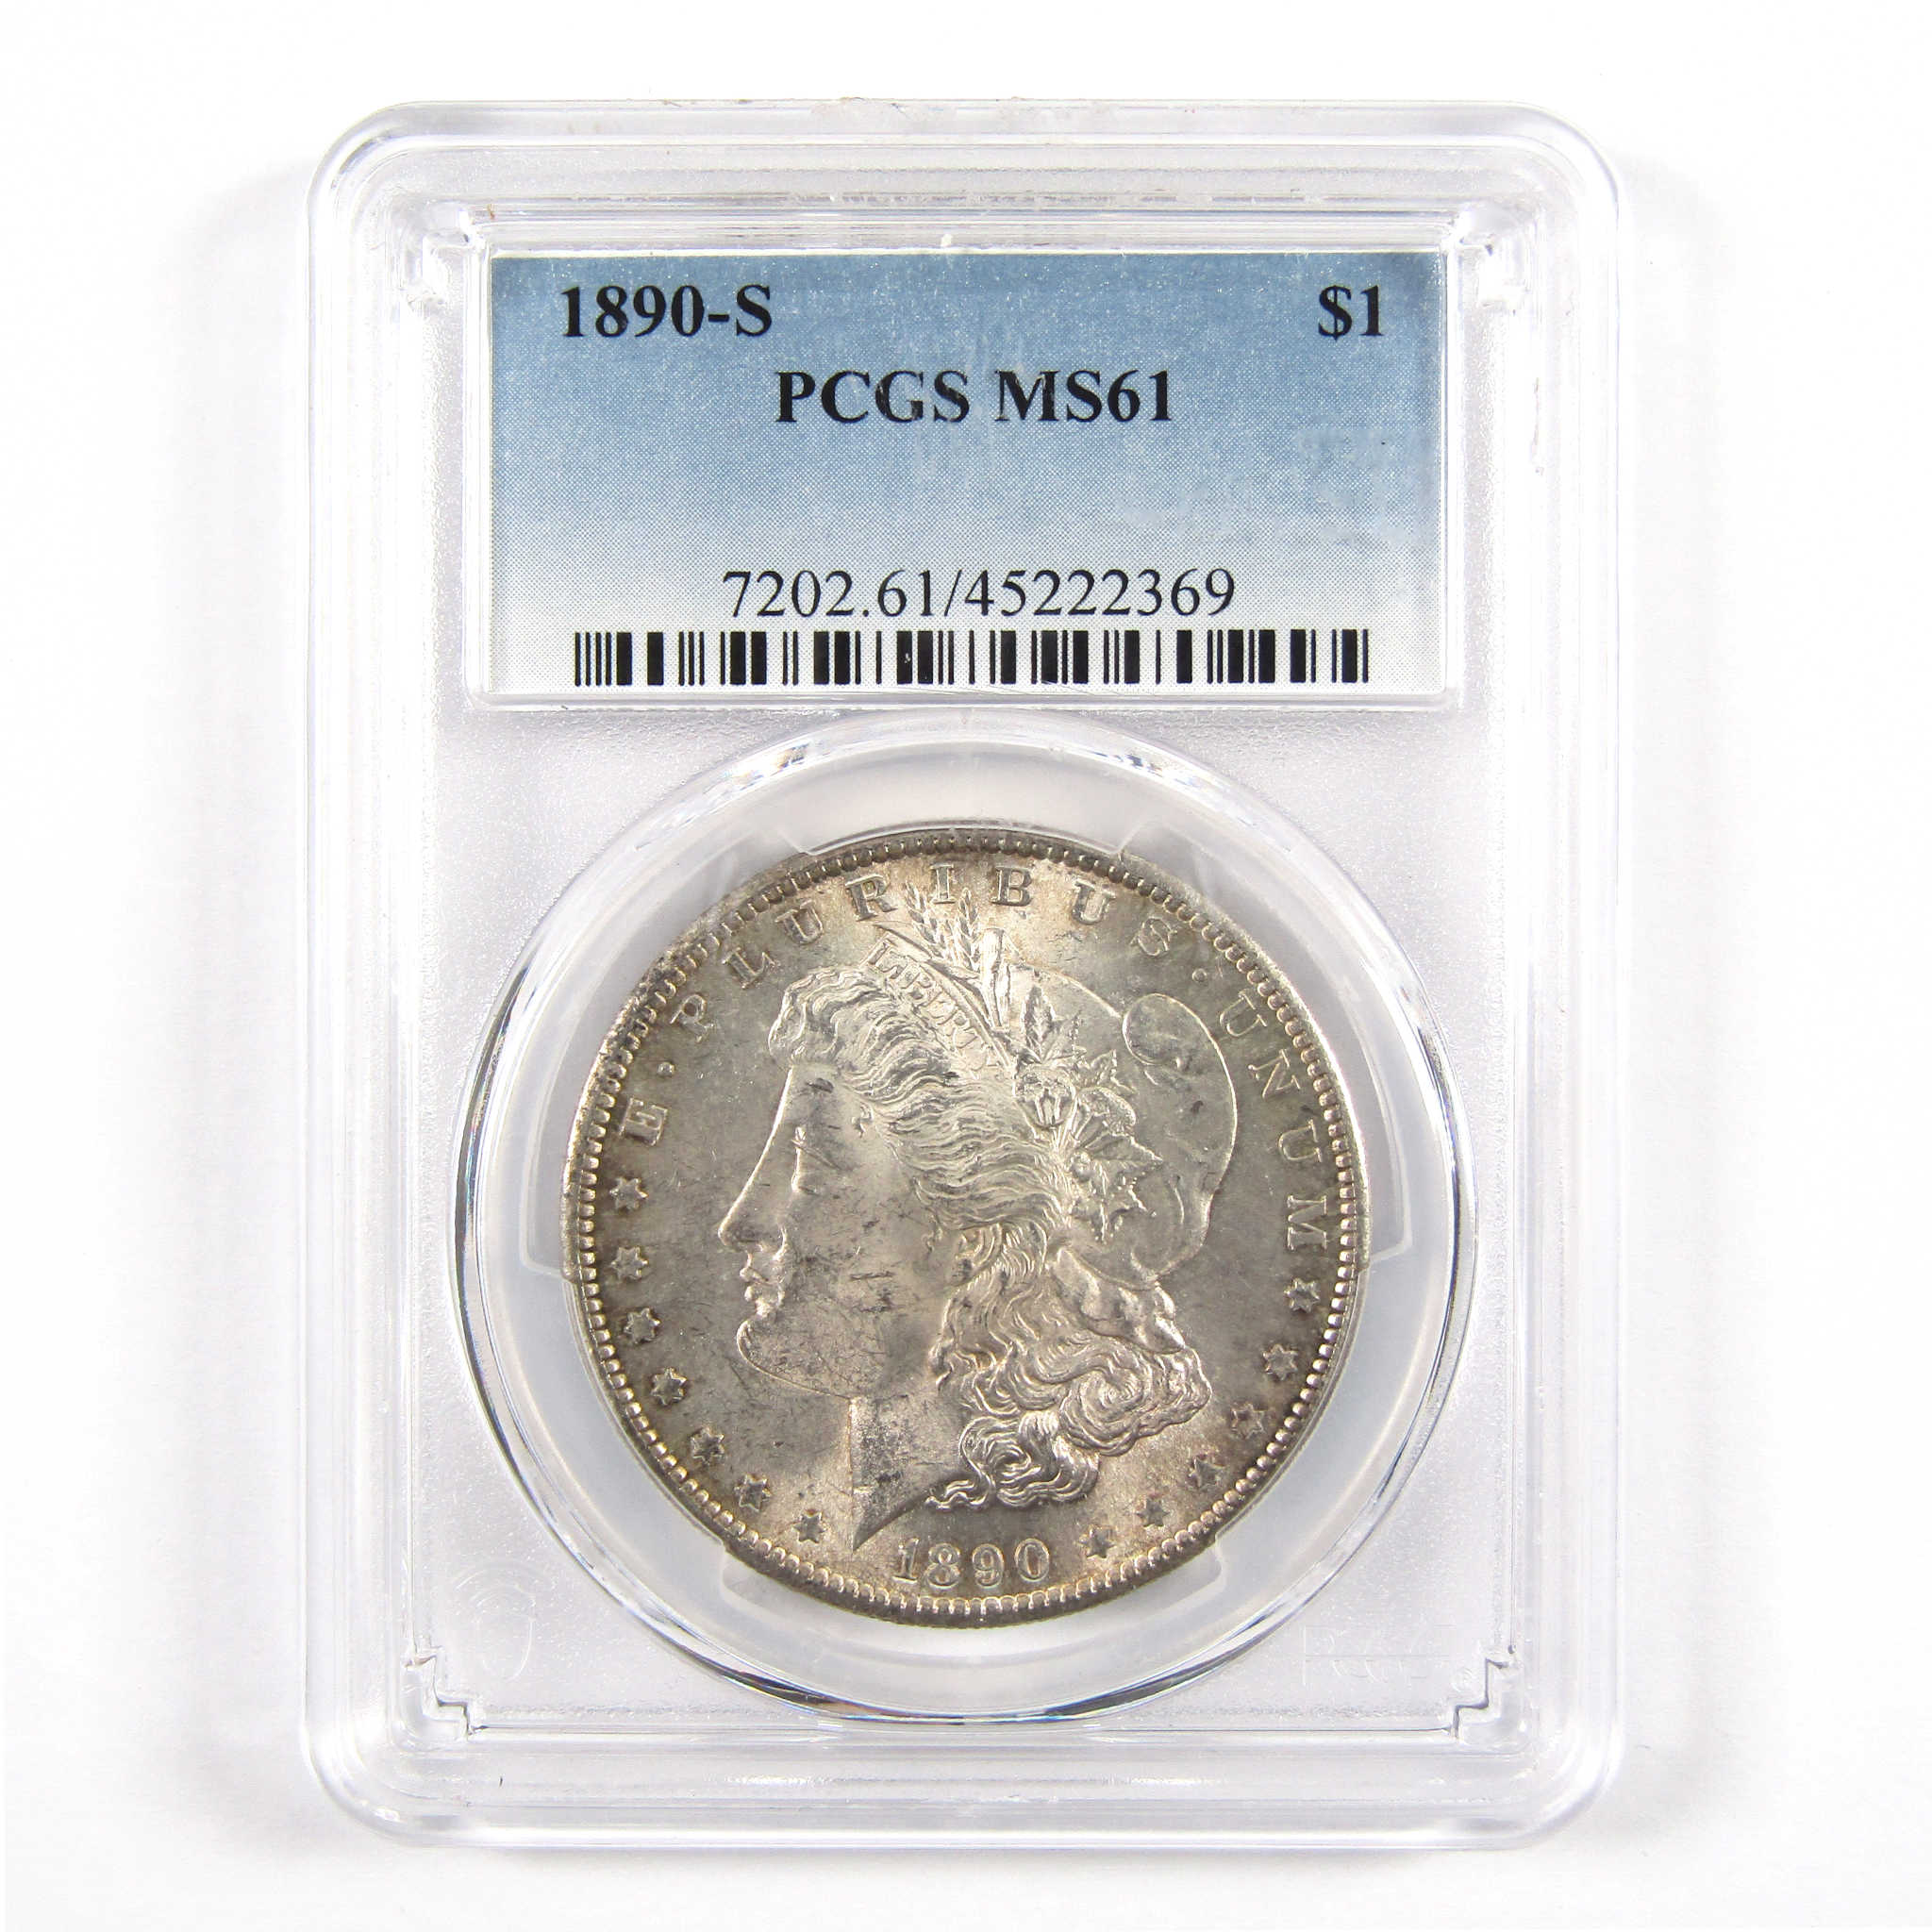 1890 S Morgan Dollar MS 61 PCGS 90% Silver $1 Uncirculated SKU:I11200 - Morgan coin - Morgan silver dollar - Morgan silver dollar for sale - Profile Coins &amp; Collectibles